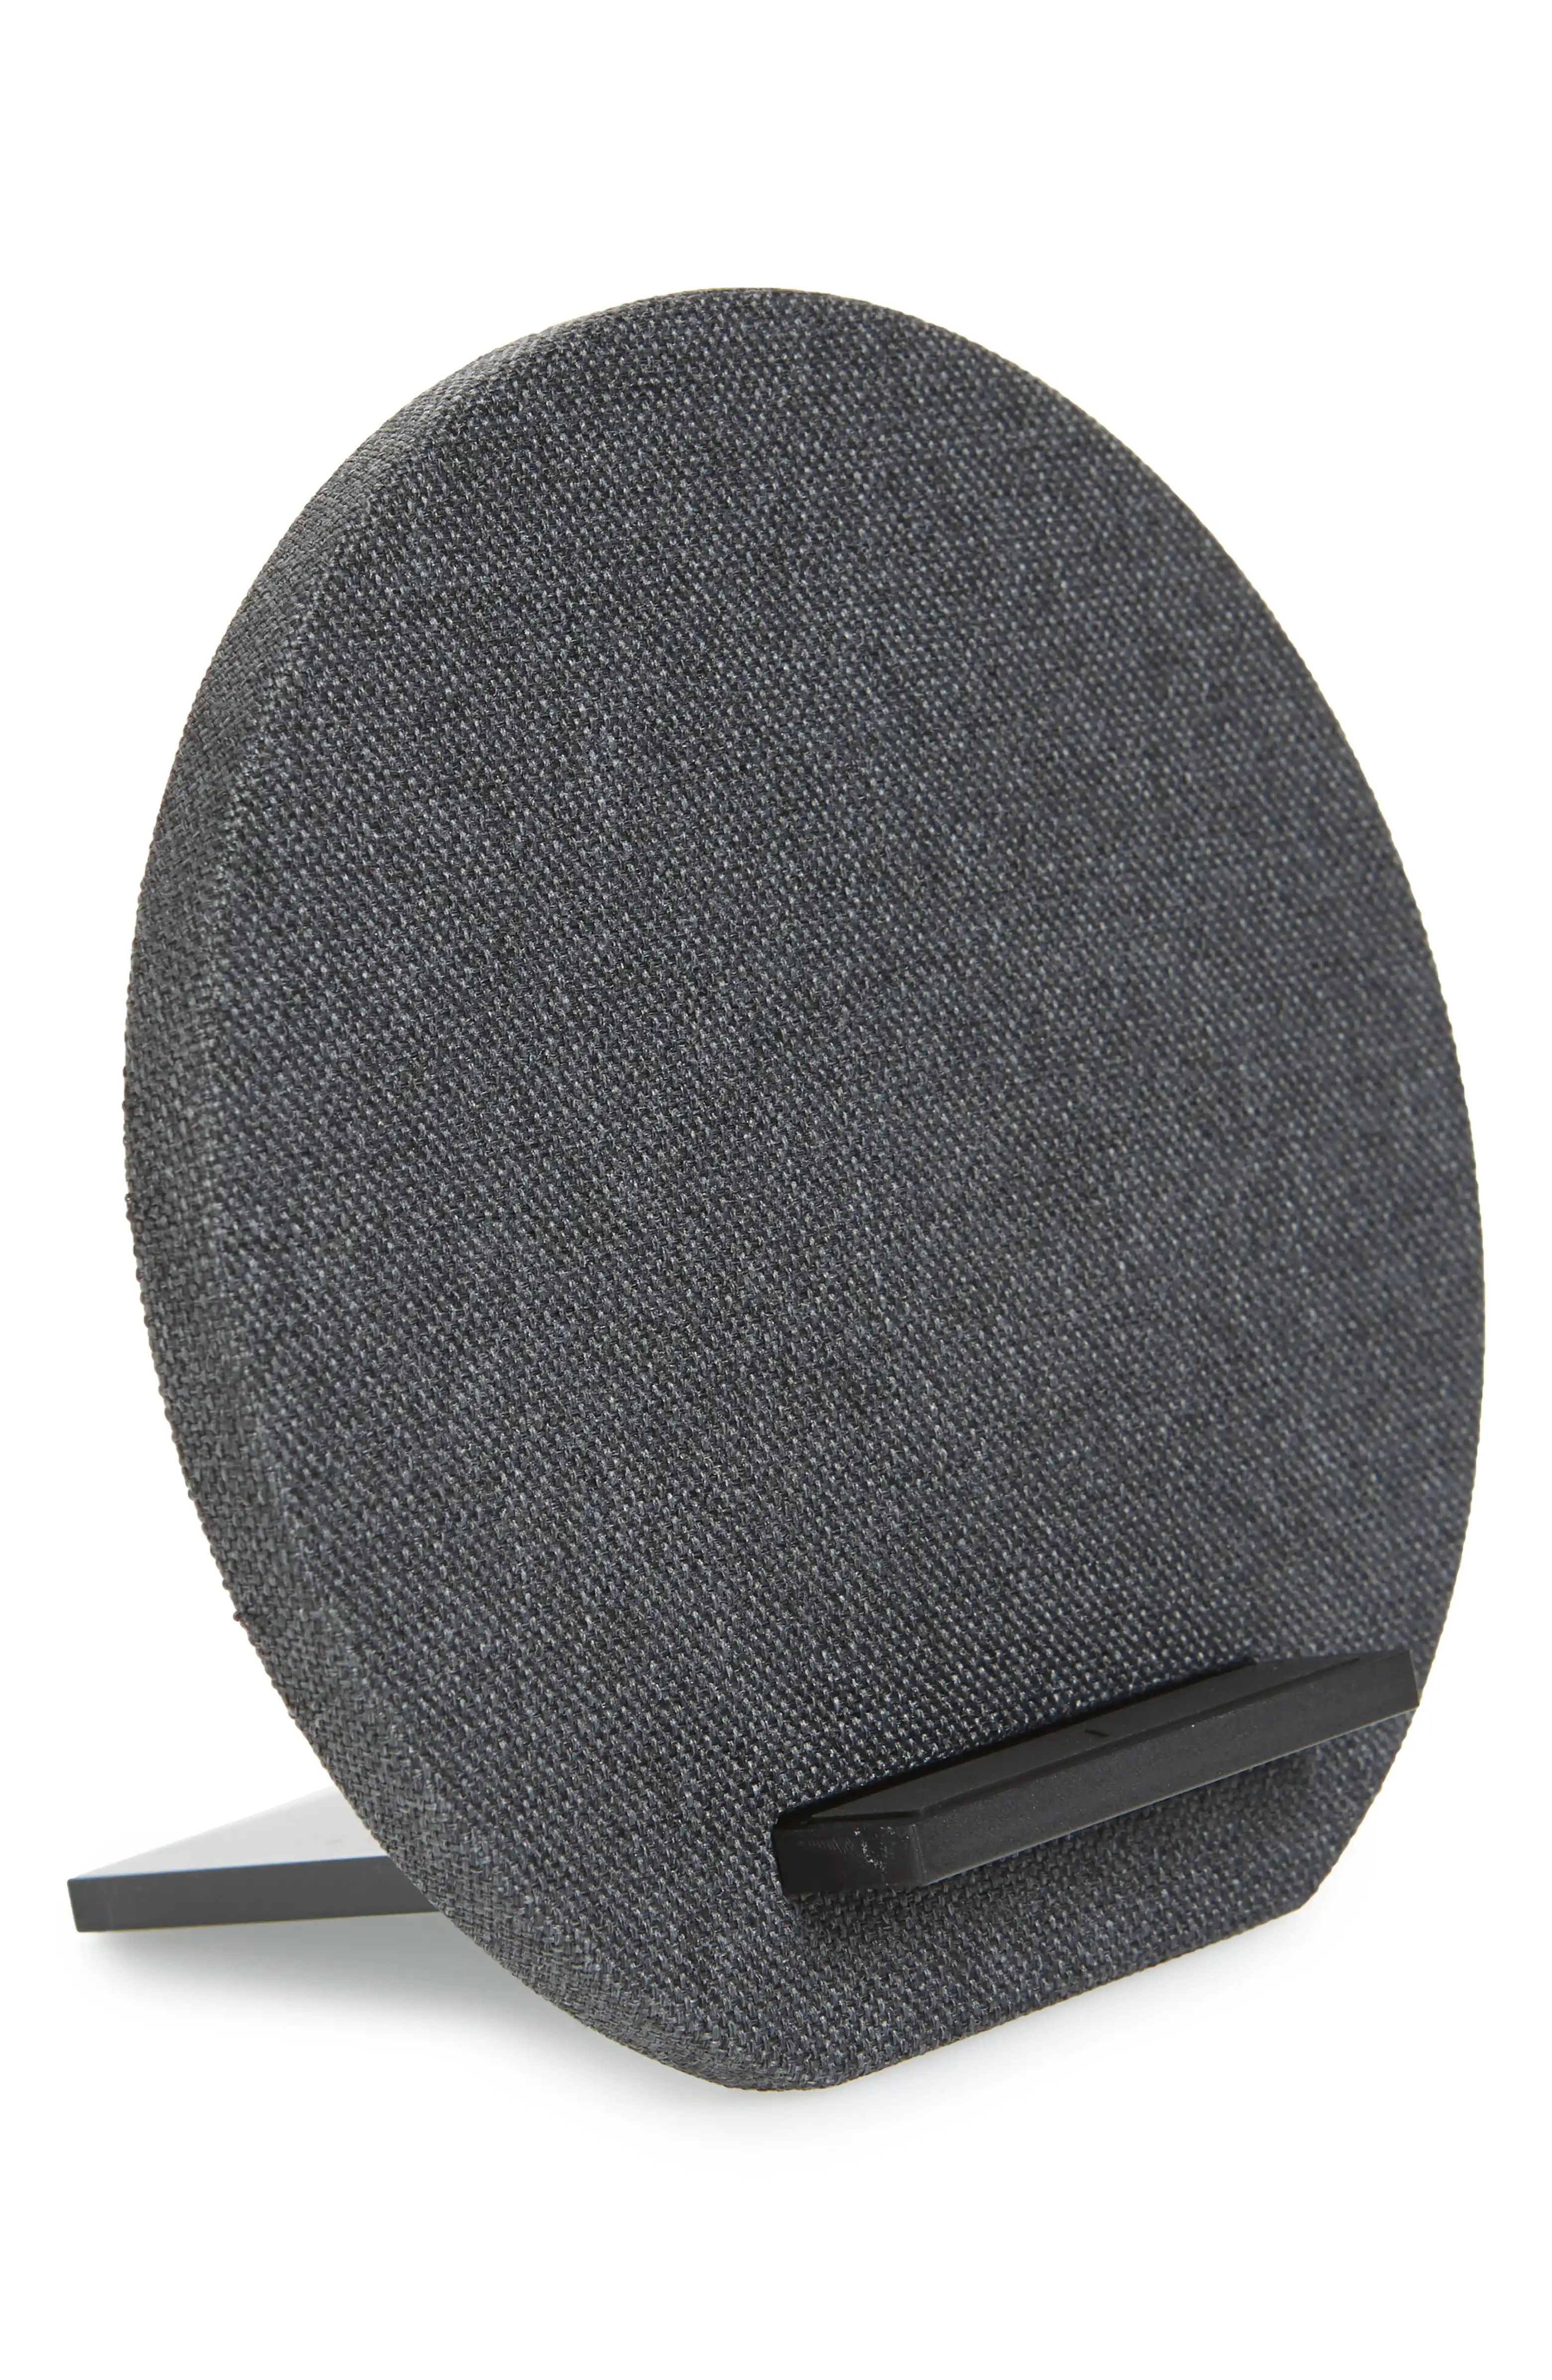 Native Union Dock Wireless Charger | Nordstrom | Nordstrom